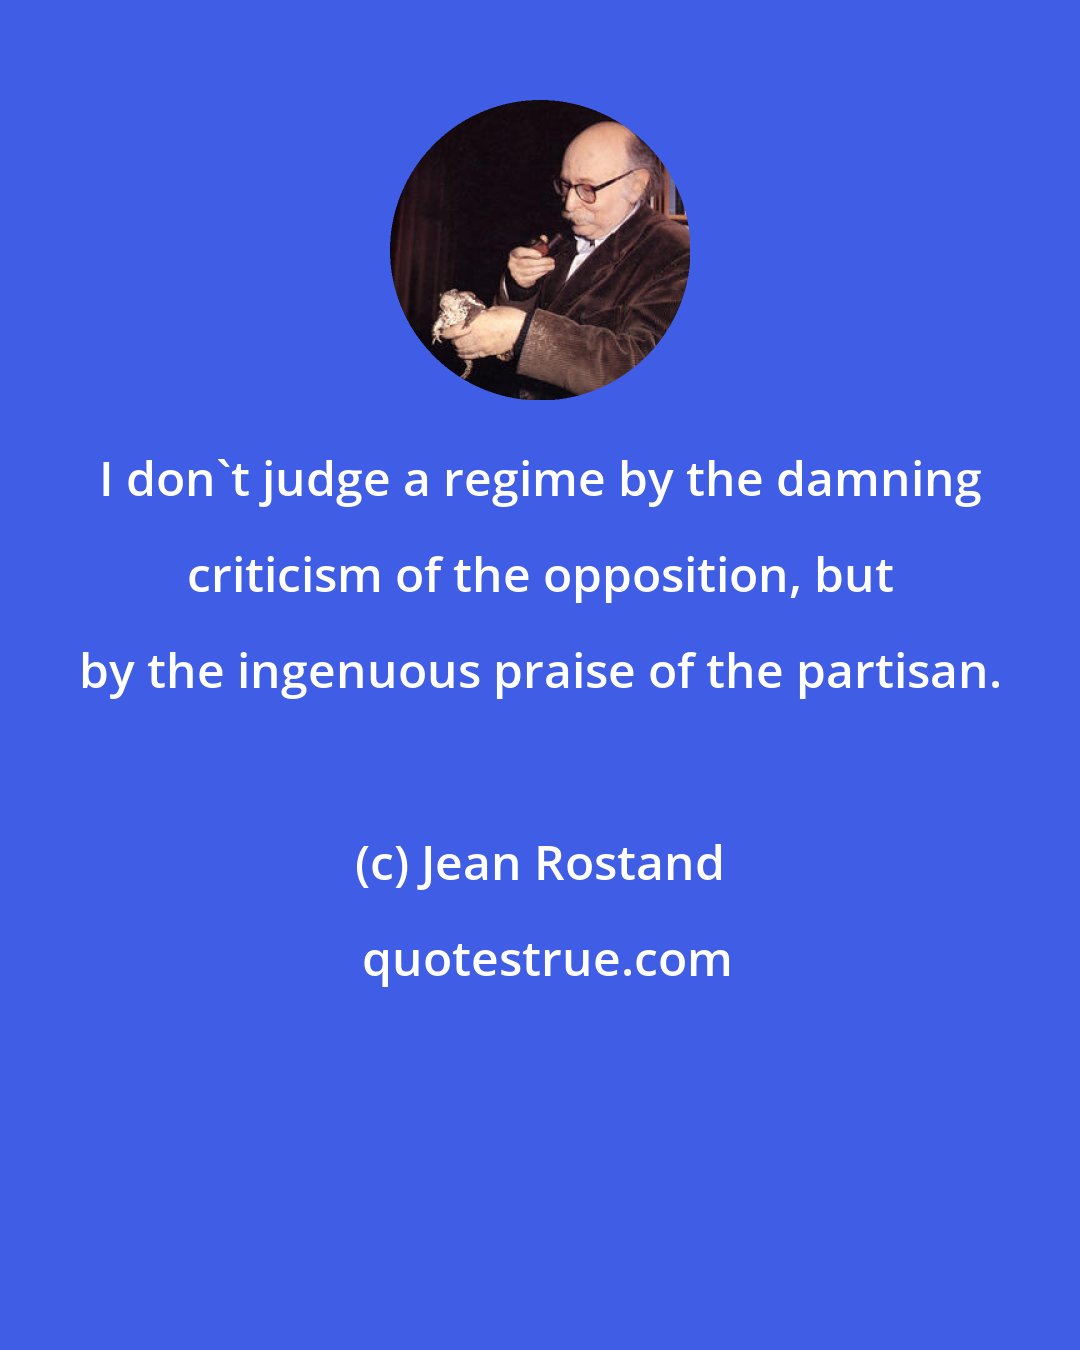 Jean Rostand: I don't judge a regime by the damning criticism of the opposition, but by the ingenuous praise of the partisan.